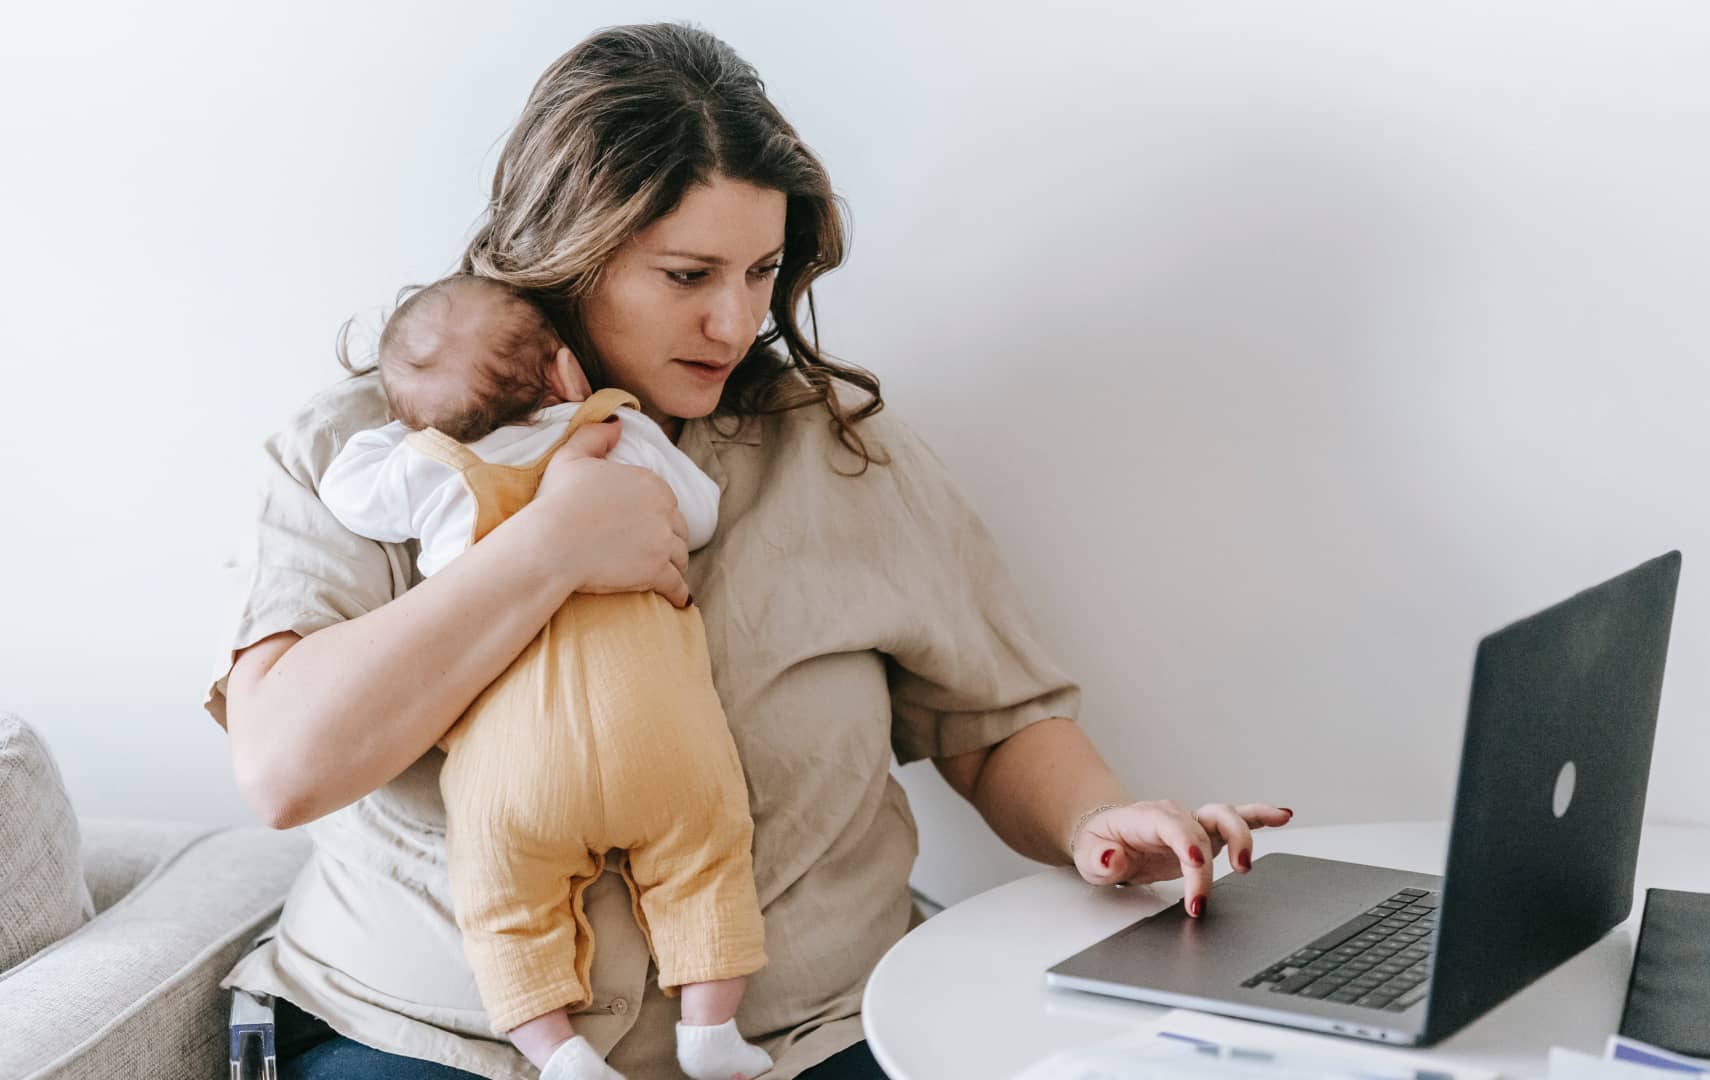 picture of a woman doing something in her laptop while holding her baby